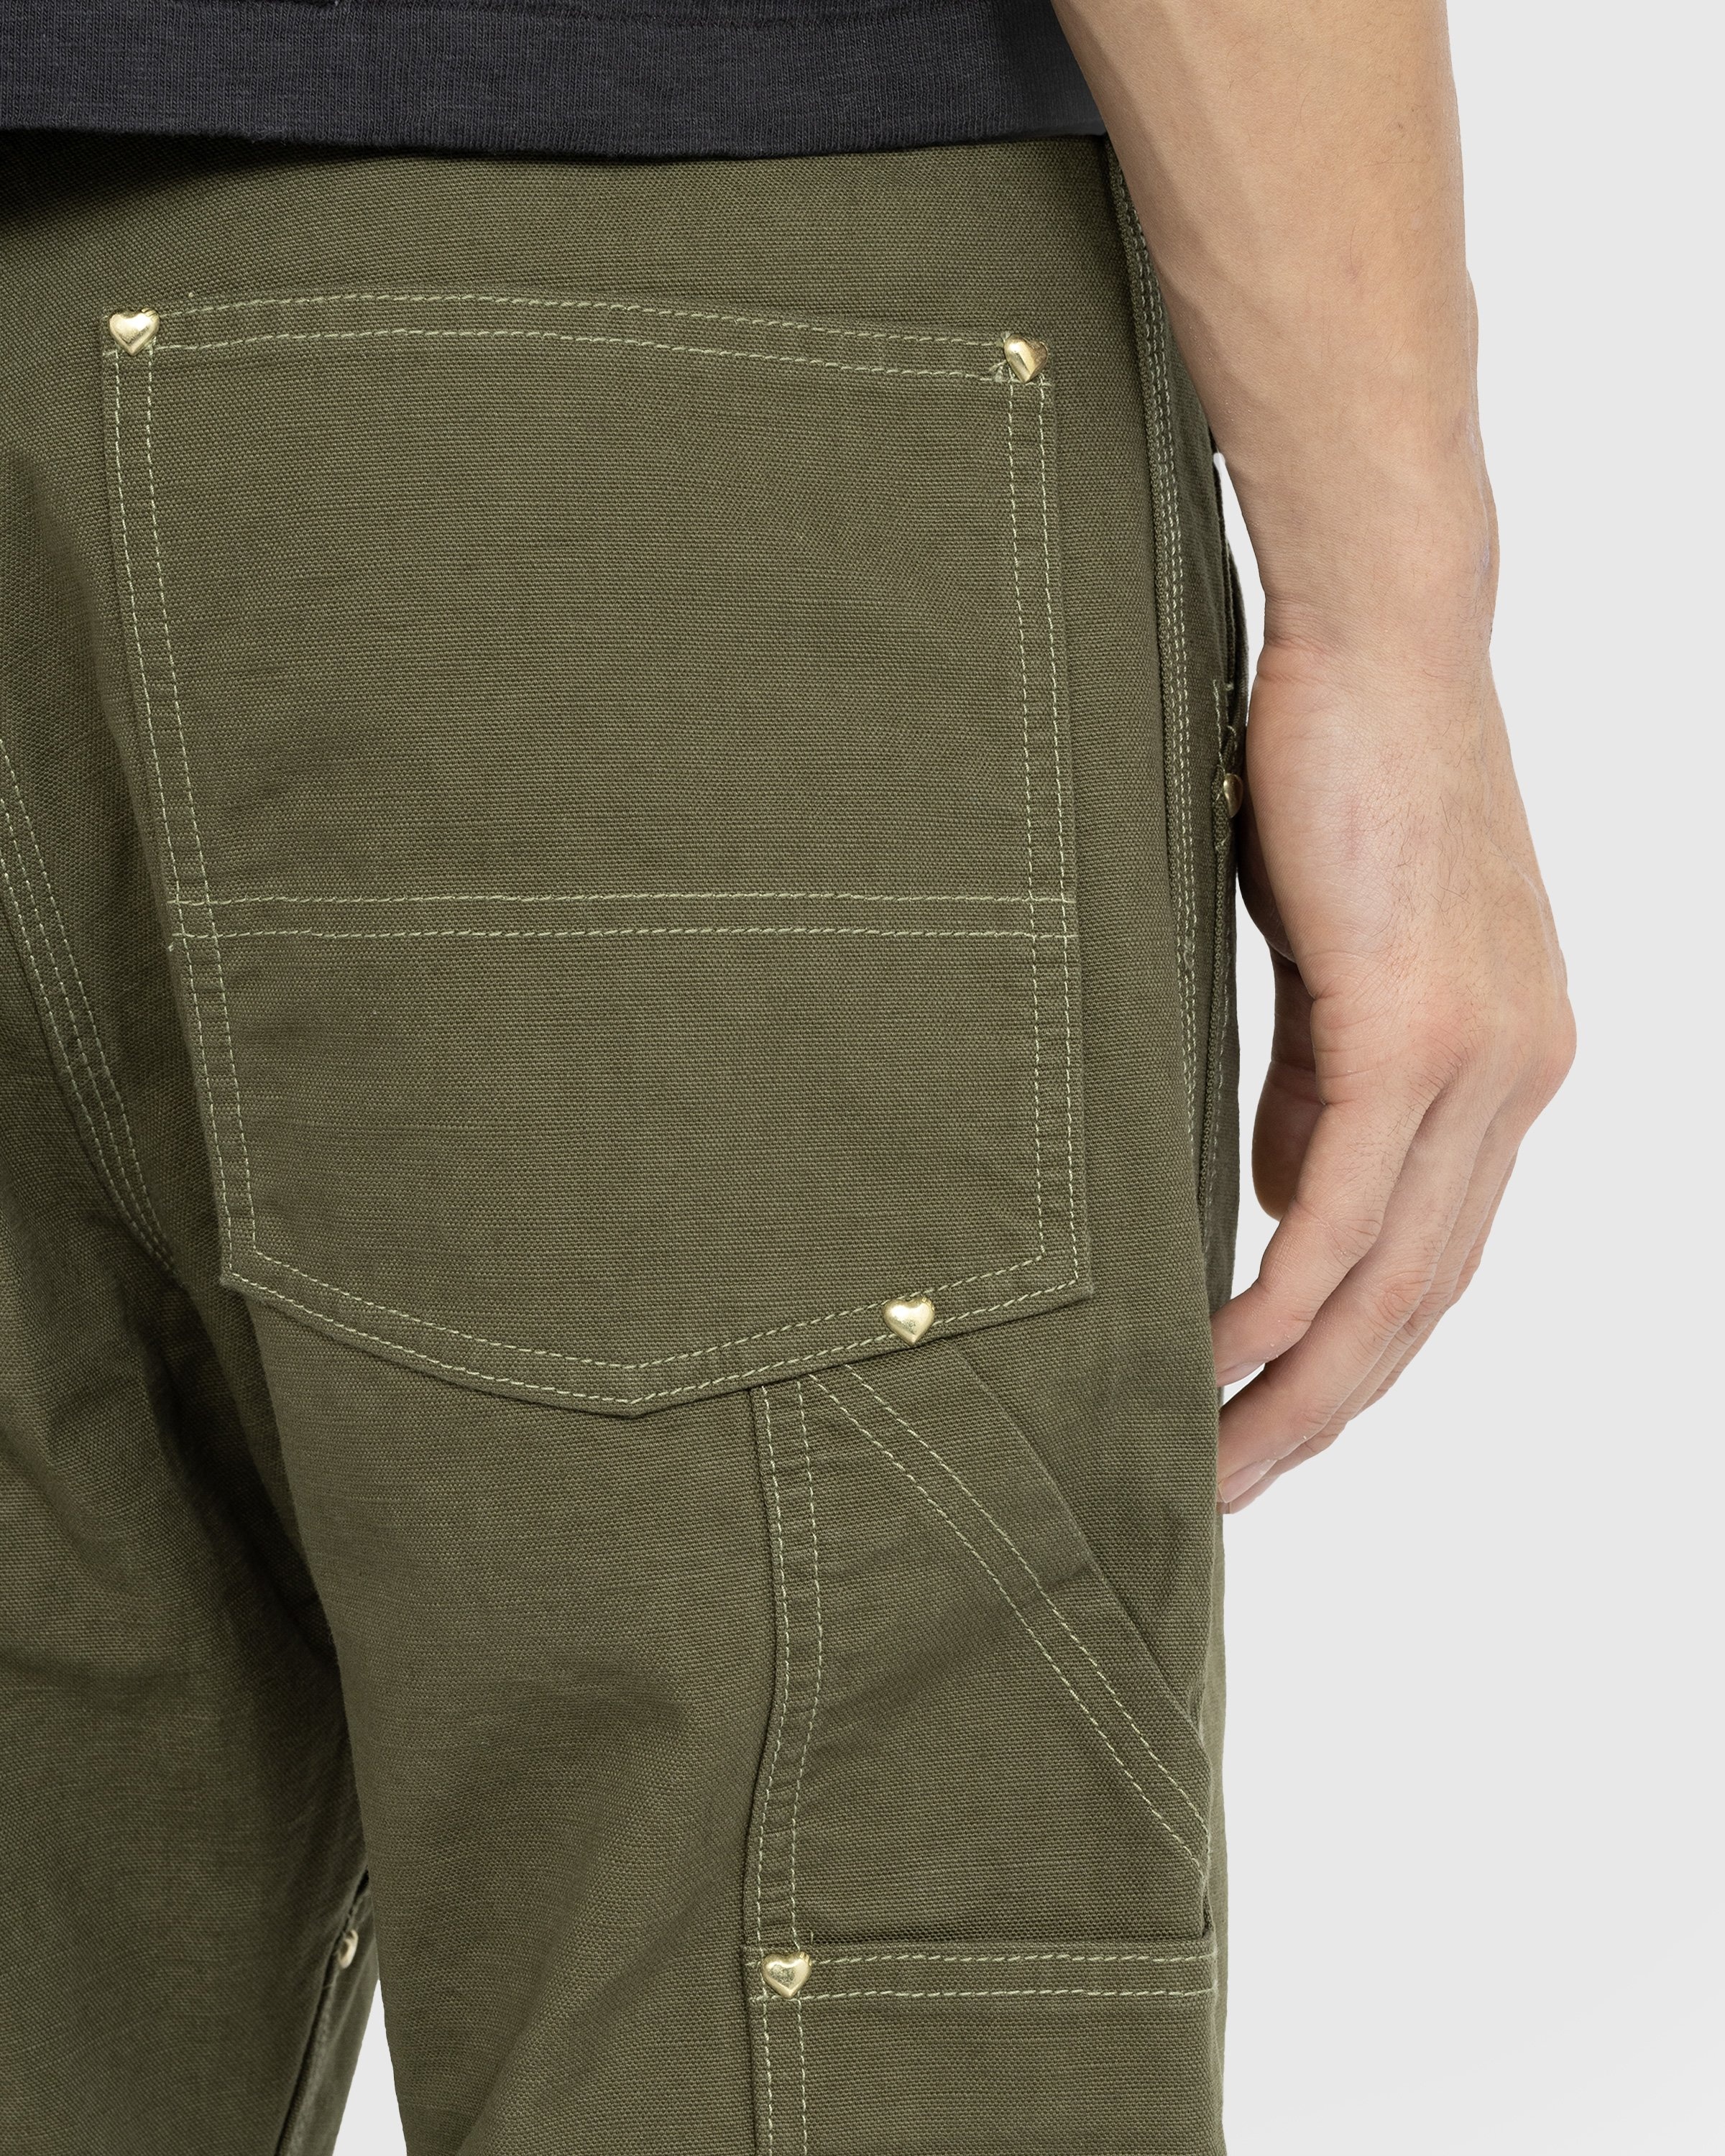 Mens - Organic Cotton Baggy Cargo Pants in Drab Olive Green